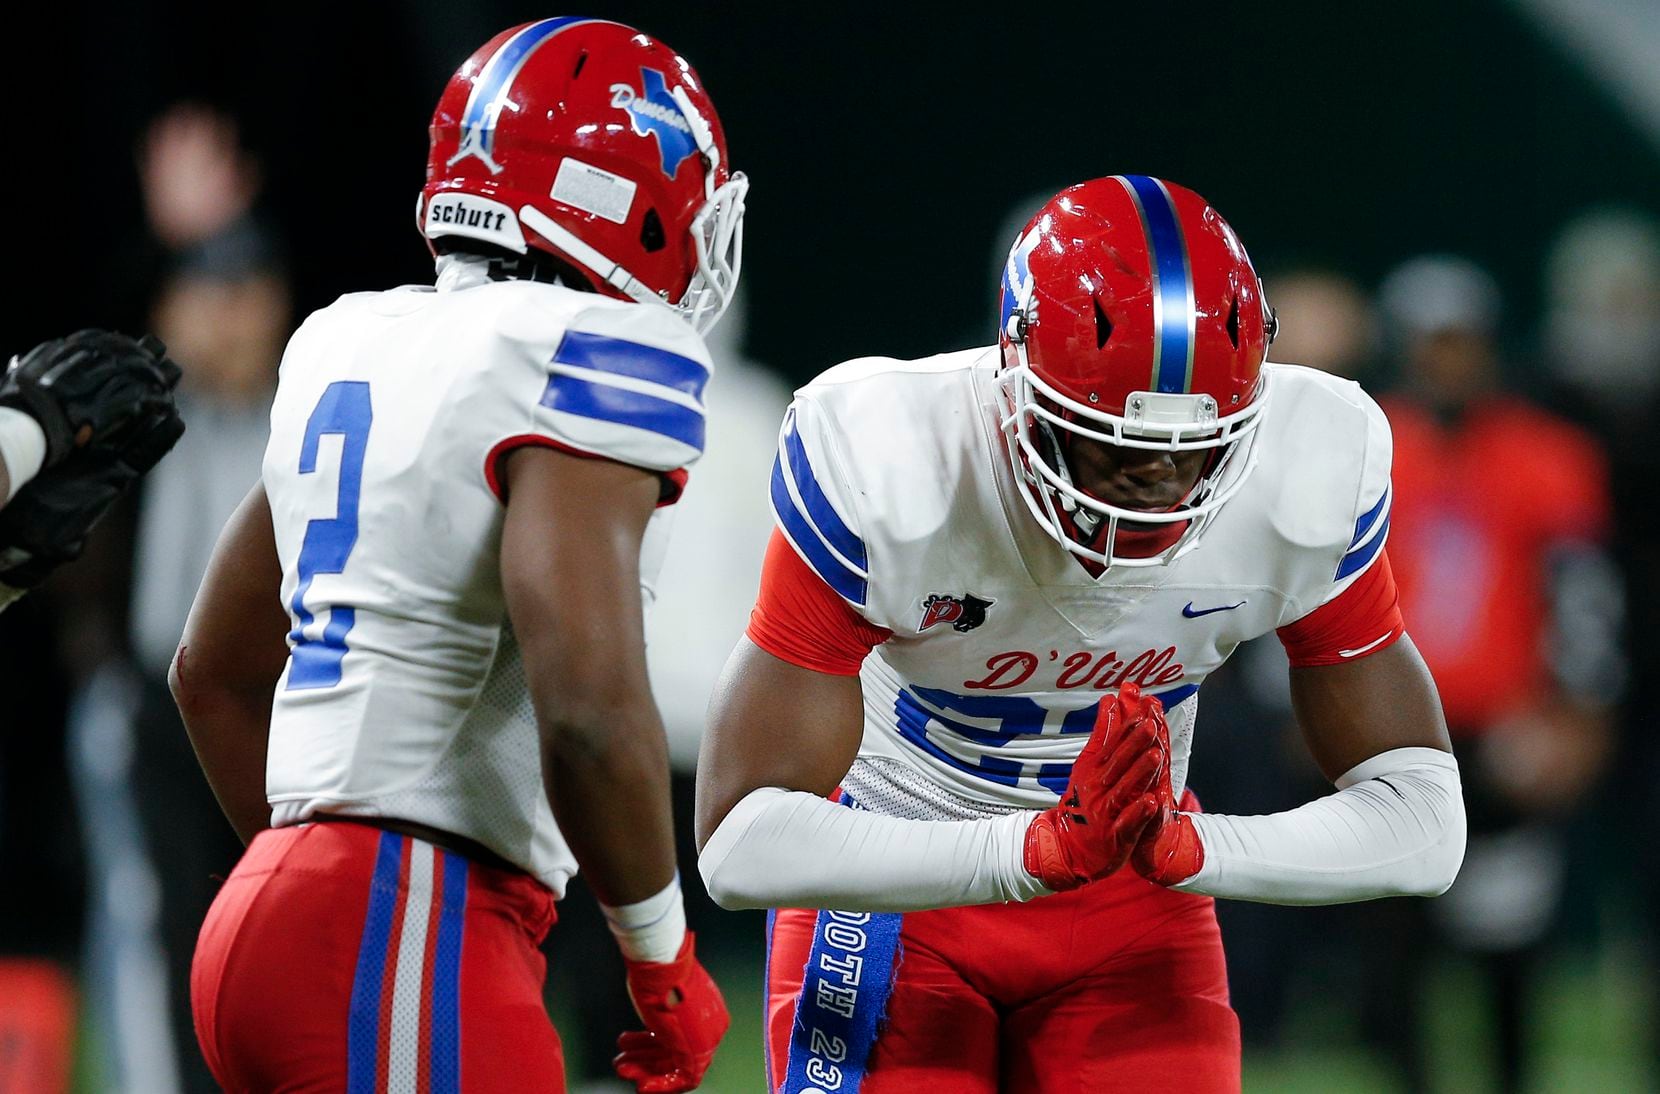 Duncanville junior linebacker Jordan Crook (2) looks on as junior defensive end Omari Abor (23) celebrates a sack during the first half of a Class 6A Division I Region II final high school football game against DeSoto, Saturday, January 2, 2021. (Brandon Wade/Special Contributor)